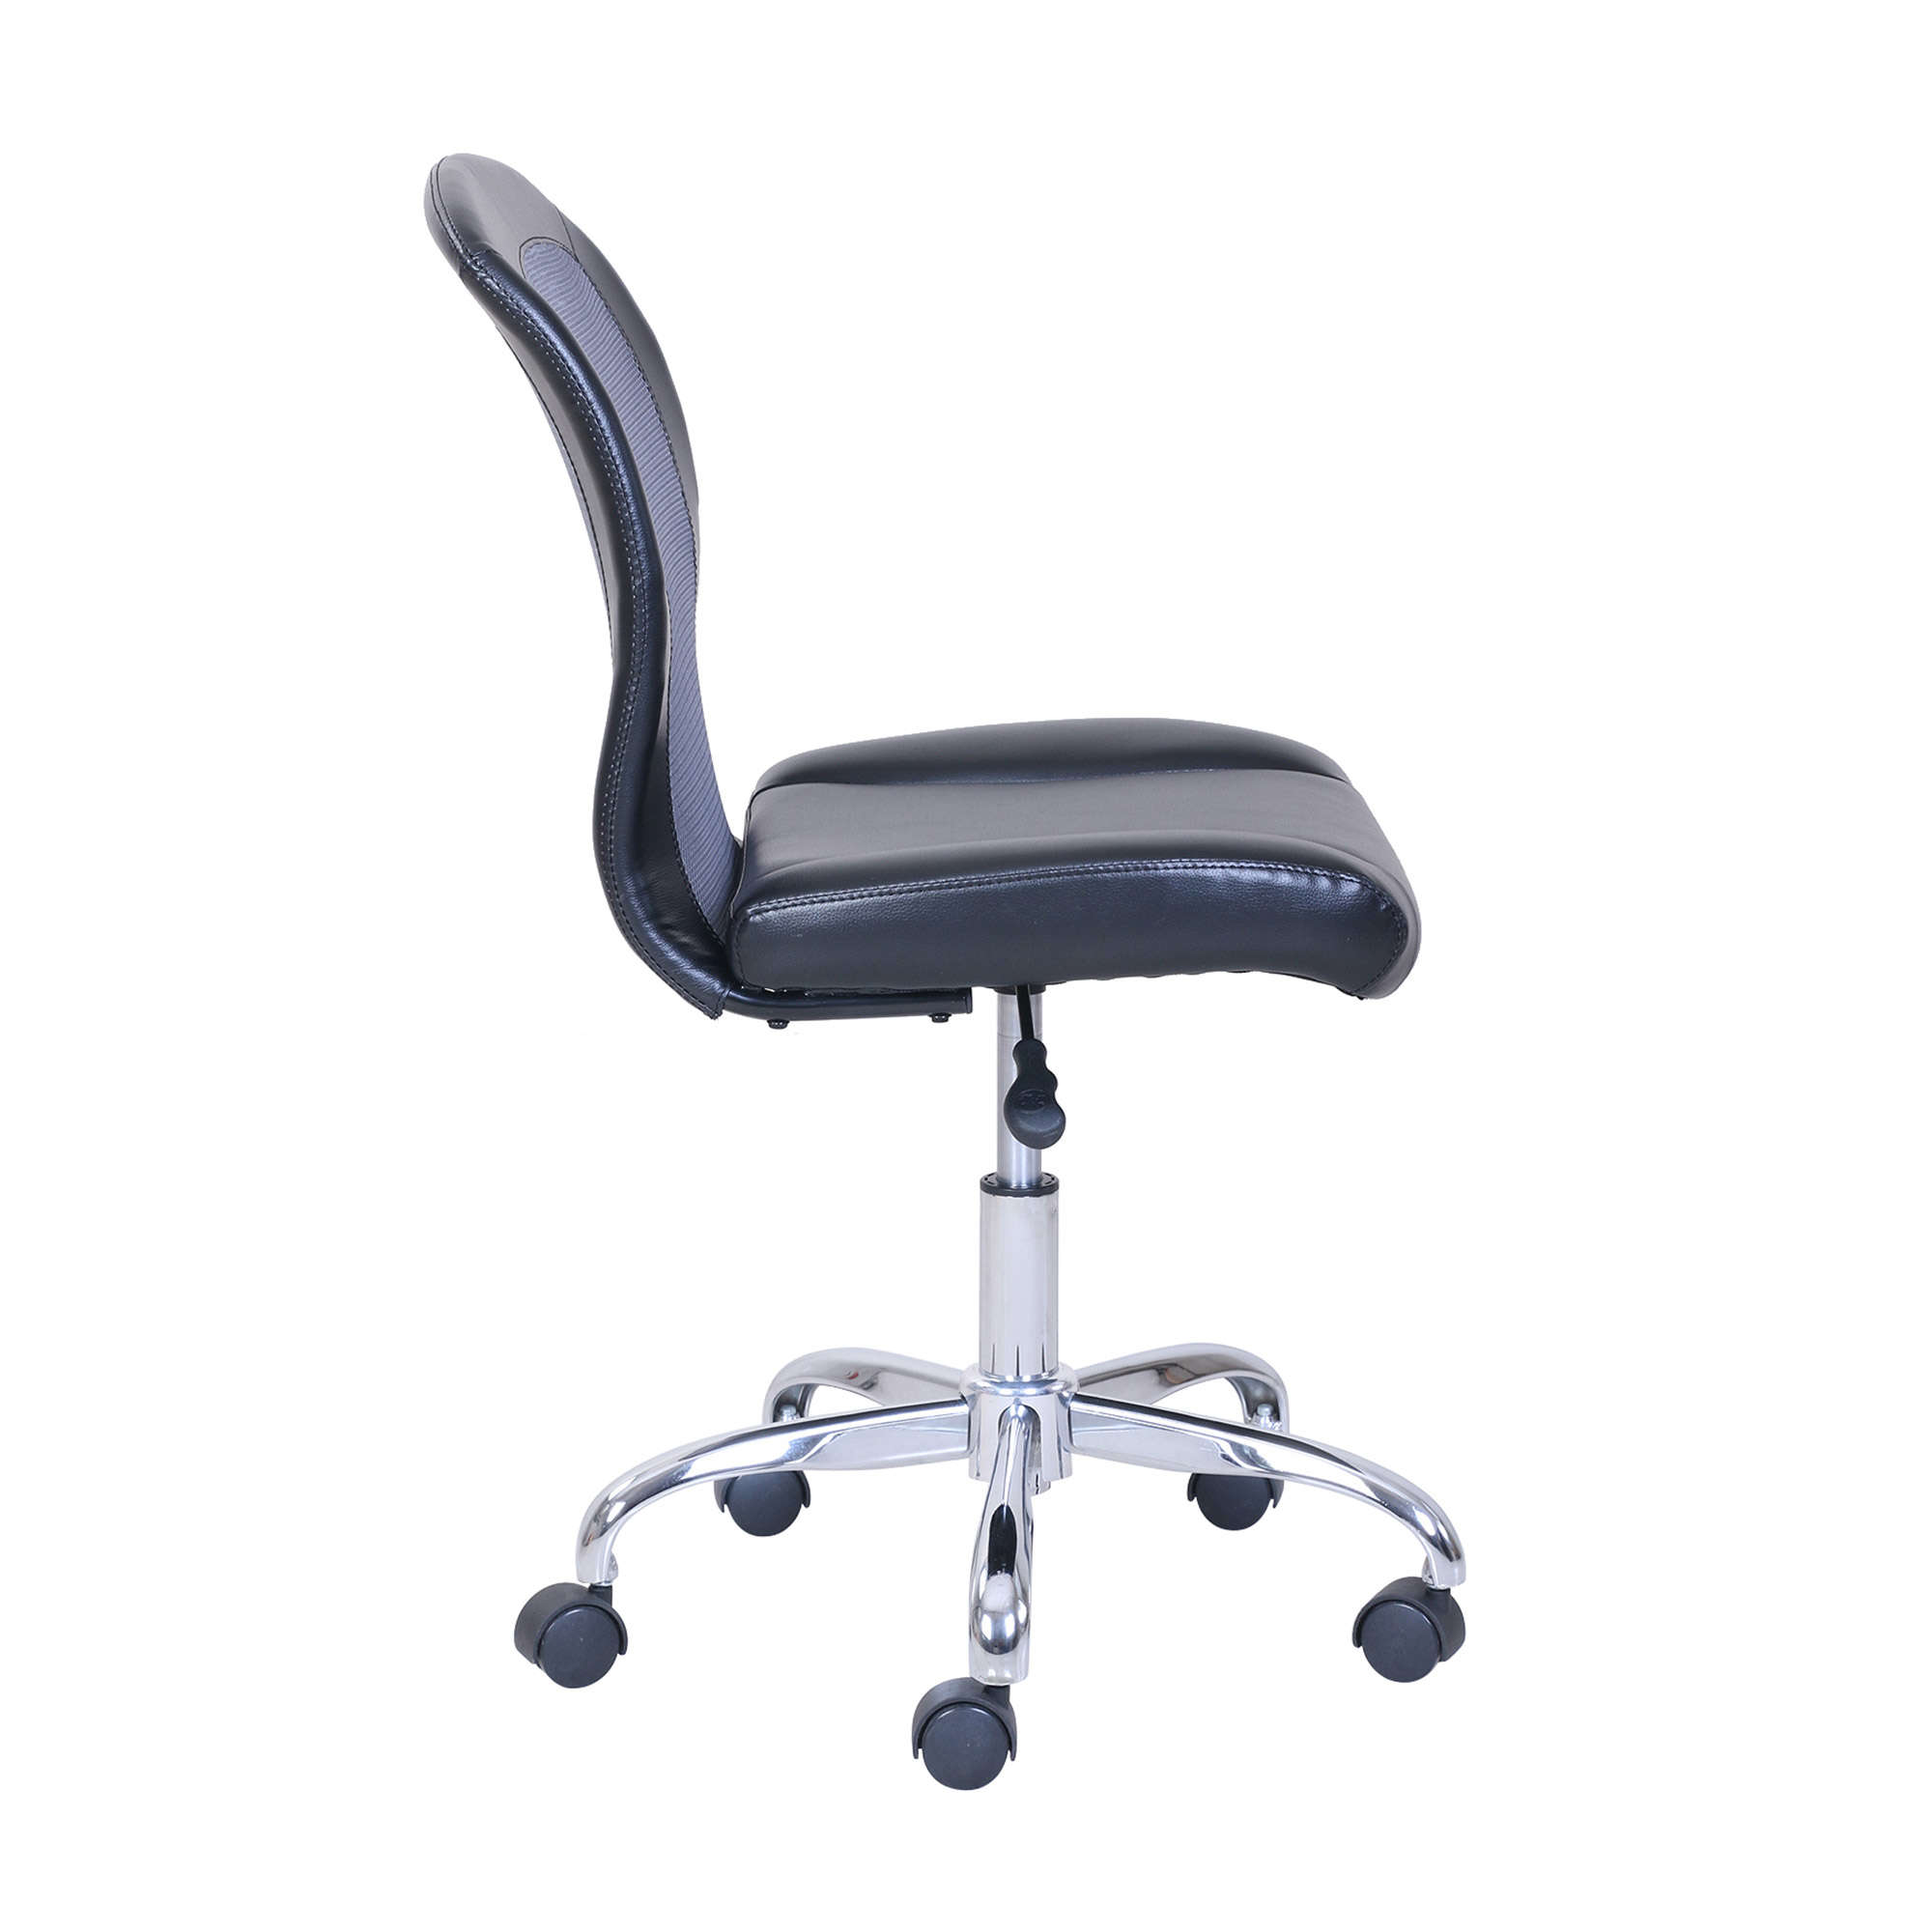 Mainstays Mid-Back, Vinyl Mesh Task Office Chair, Black and Gray - image 4 of 5